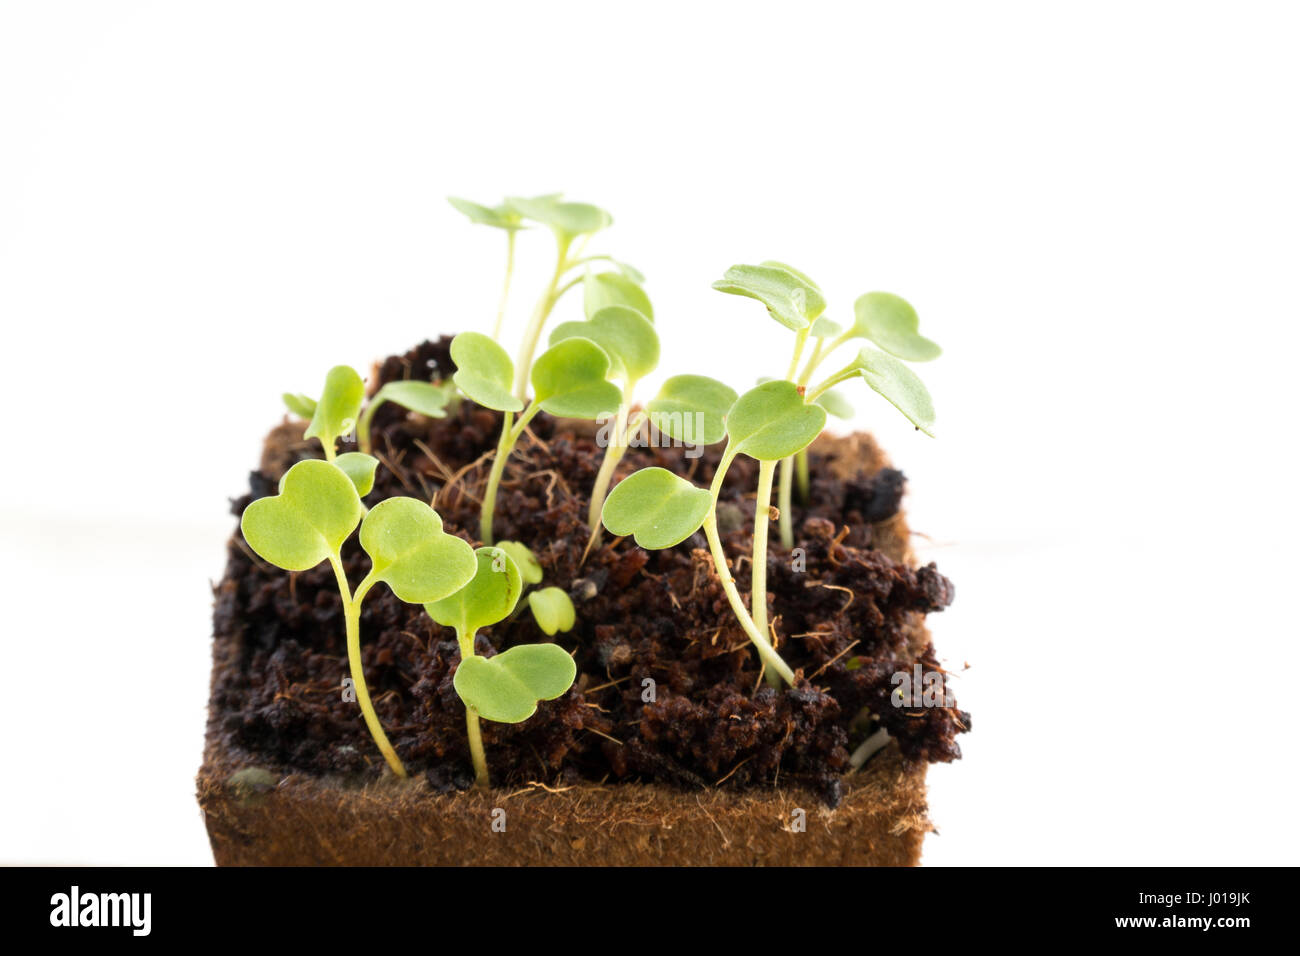 Young fresh seedlings of rucola or rocket salad in peat pot on white background Stock Photo